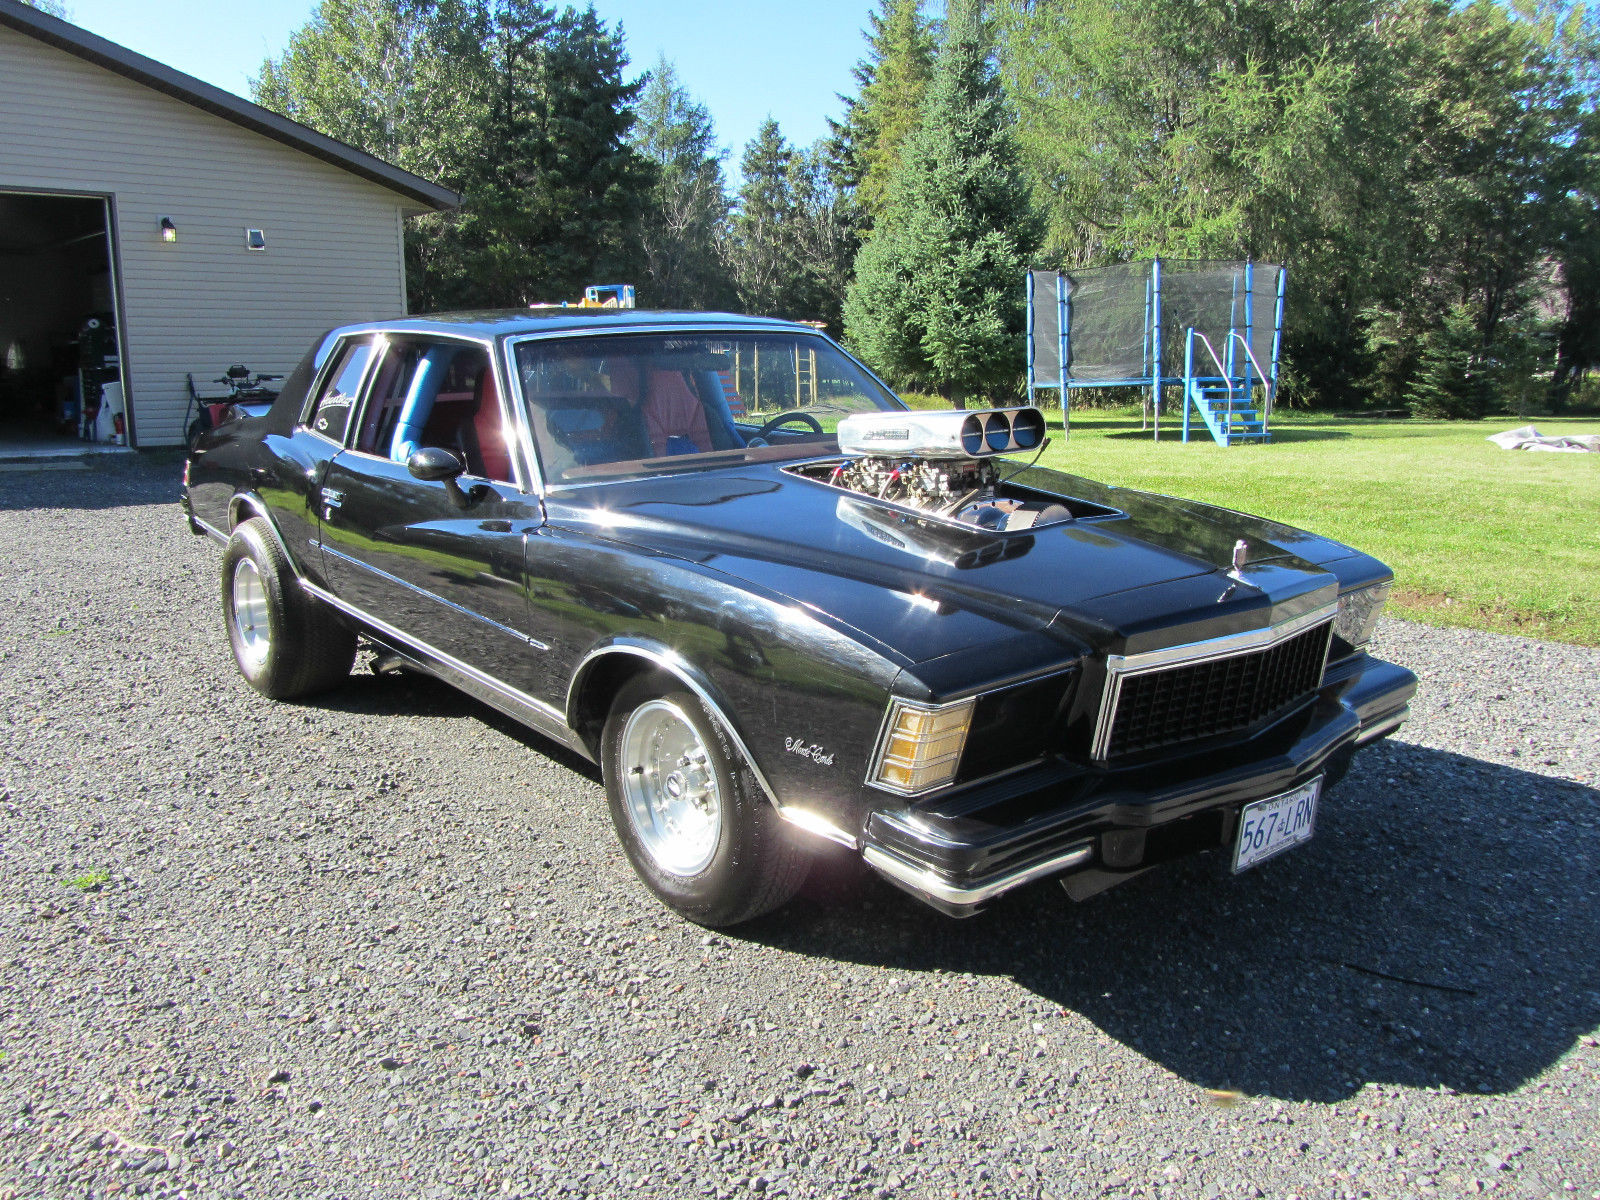 1979 Chevrolet Monte carlo SS supercharger 6-71 blower-143